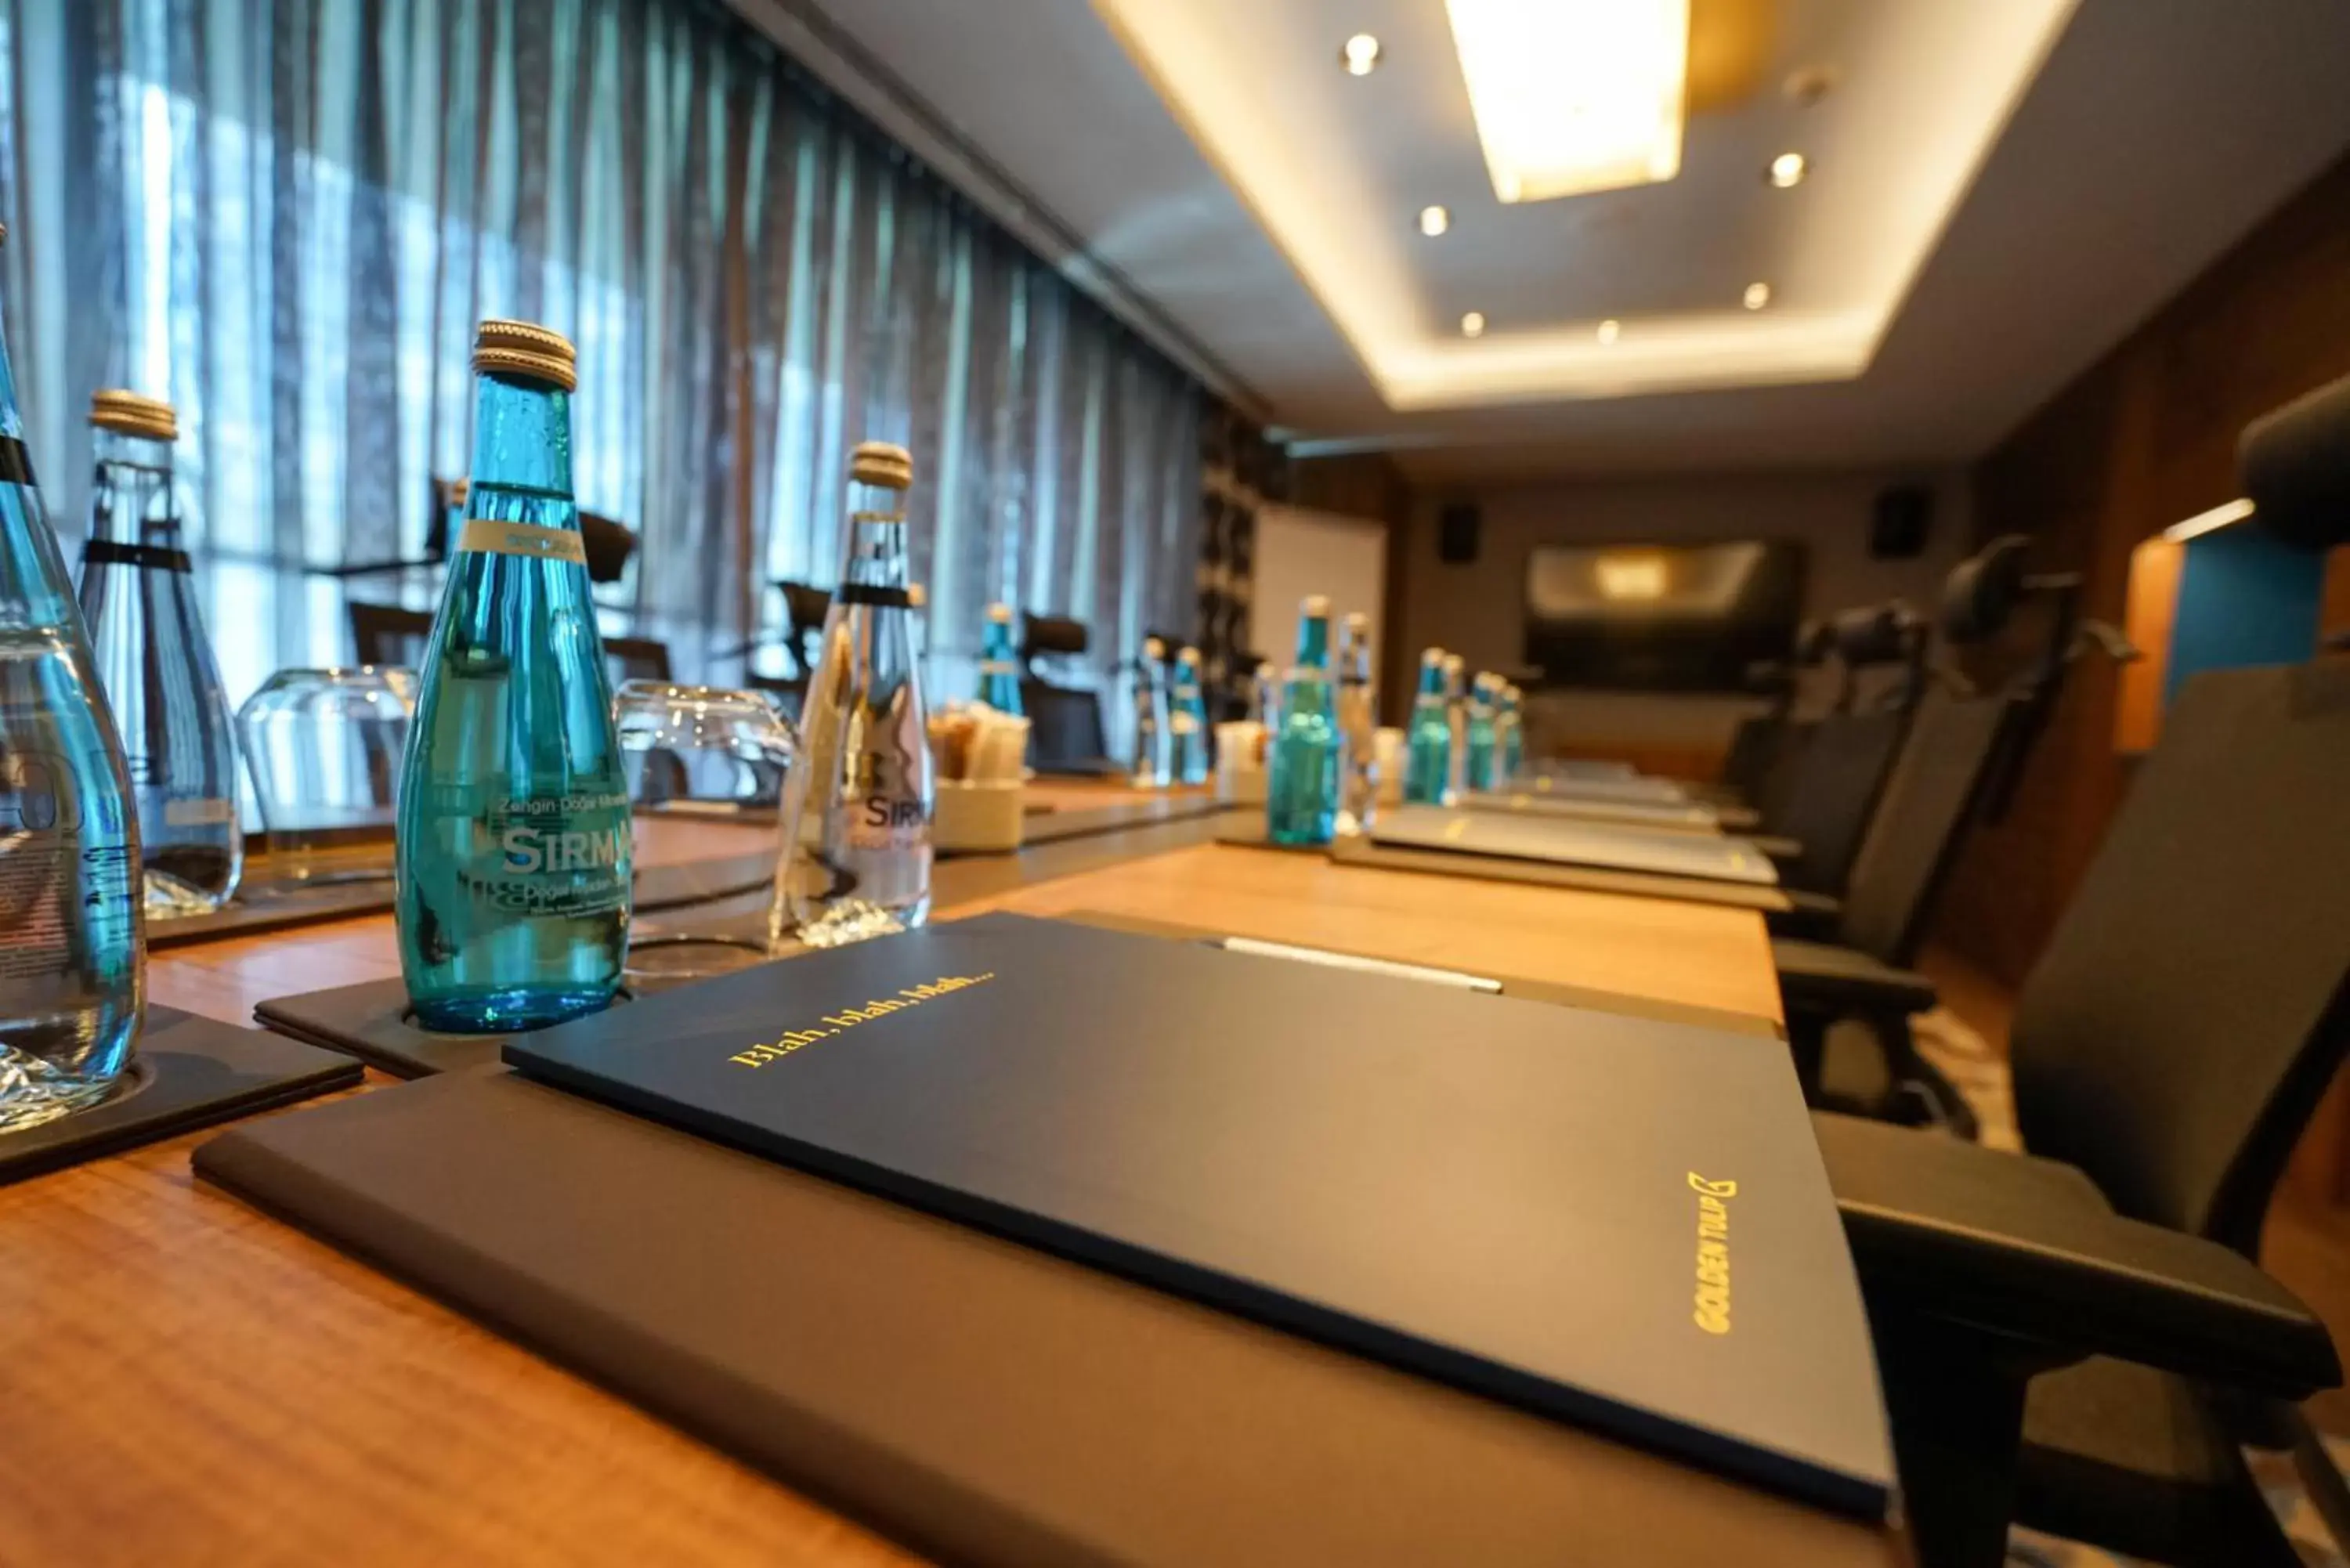 Meeting/conference room in Golden Tulip Istanbul Bayrampasa